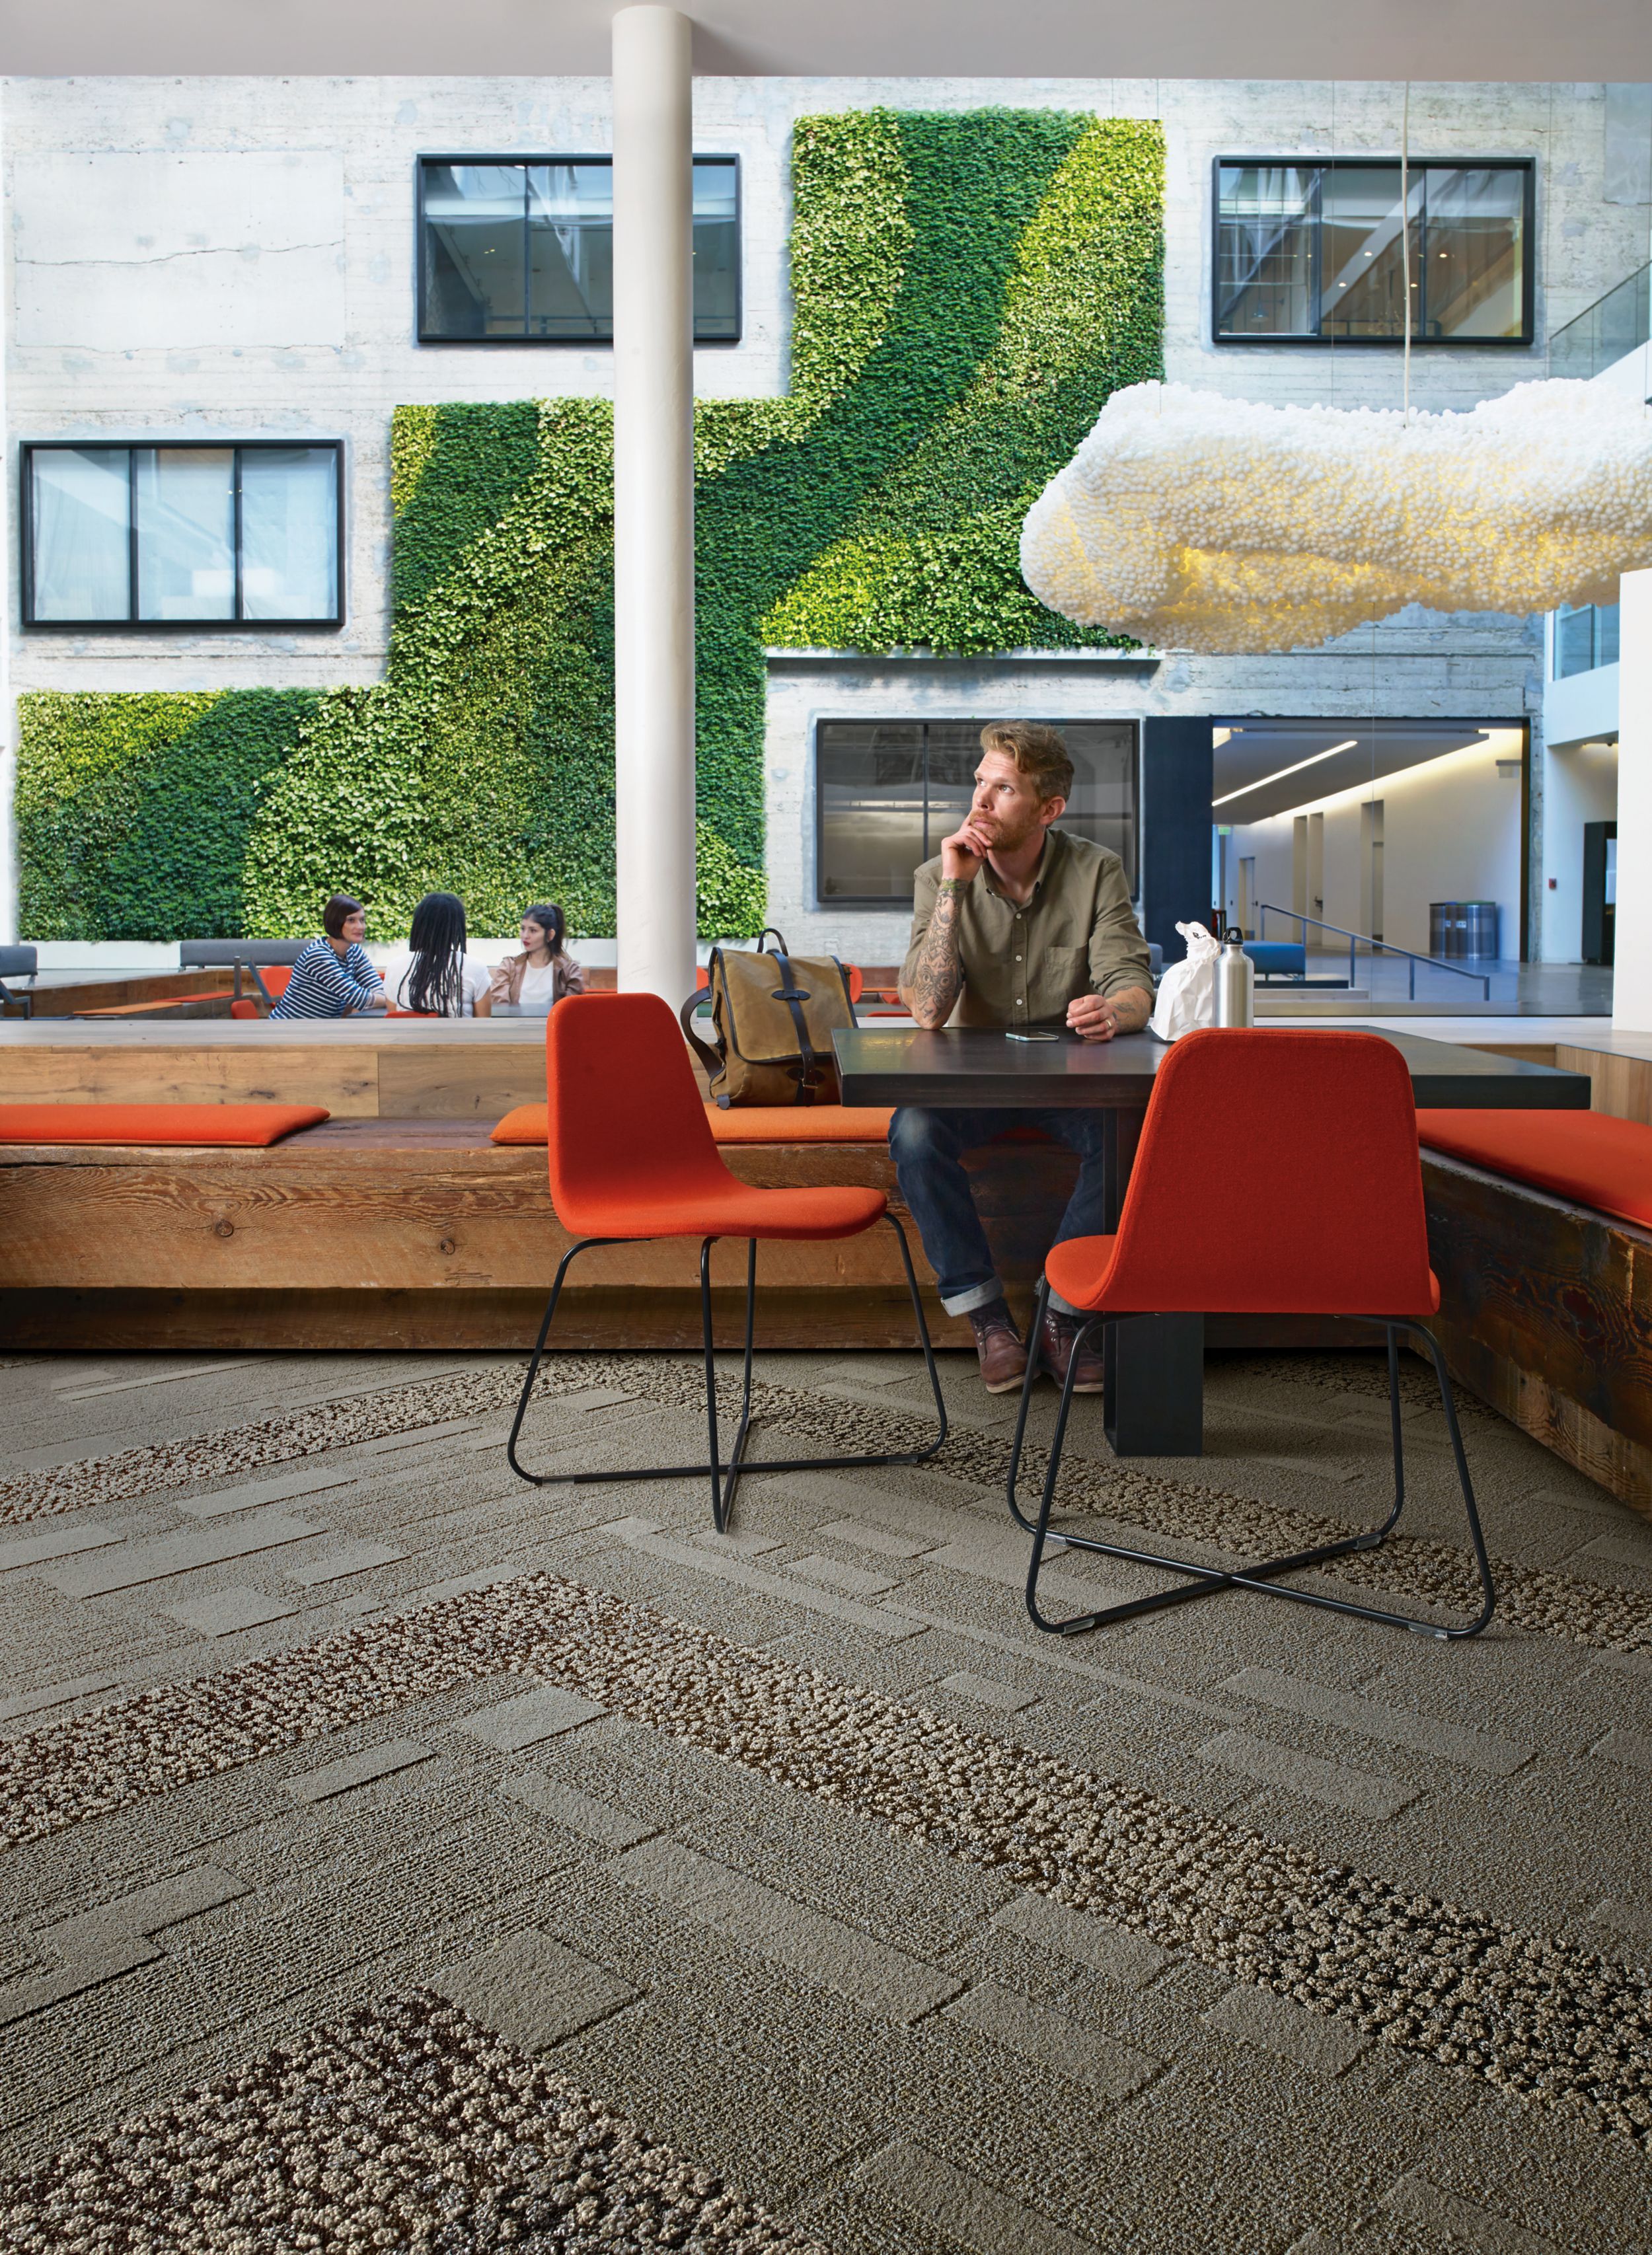 Interface EM552 plank carpet tile with man sitting at table with lunch and group meeting in front of vine wall in the background  número de imagen 3